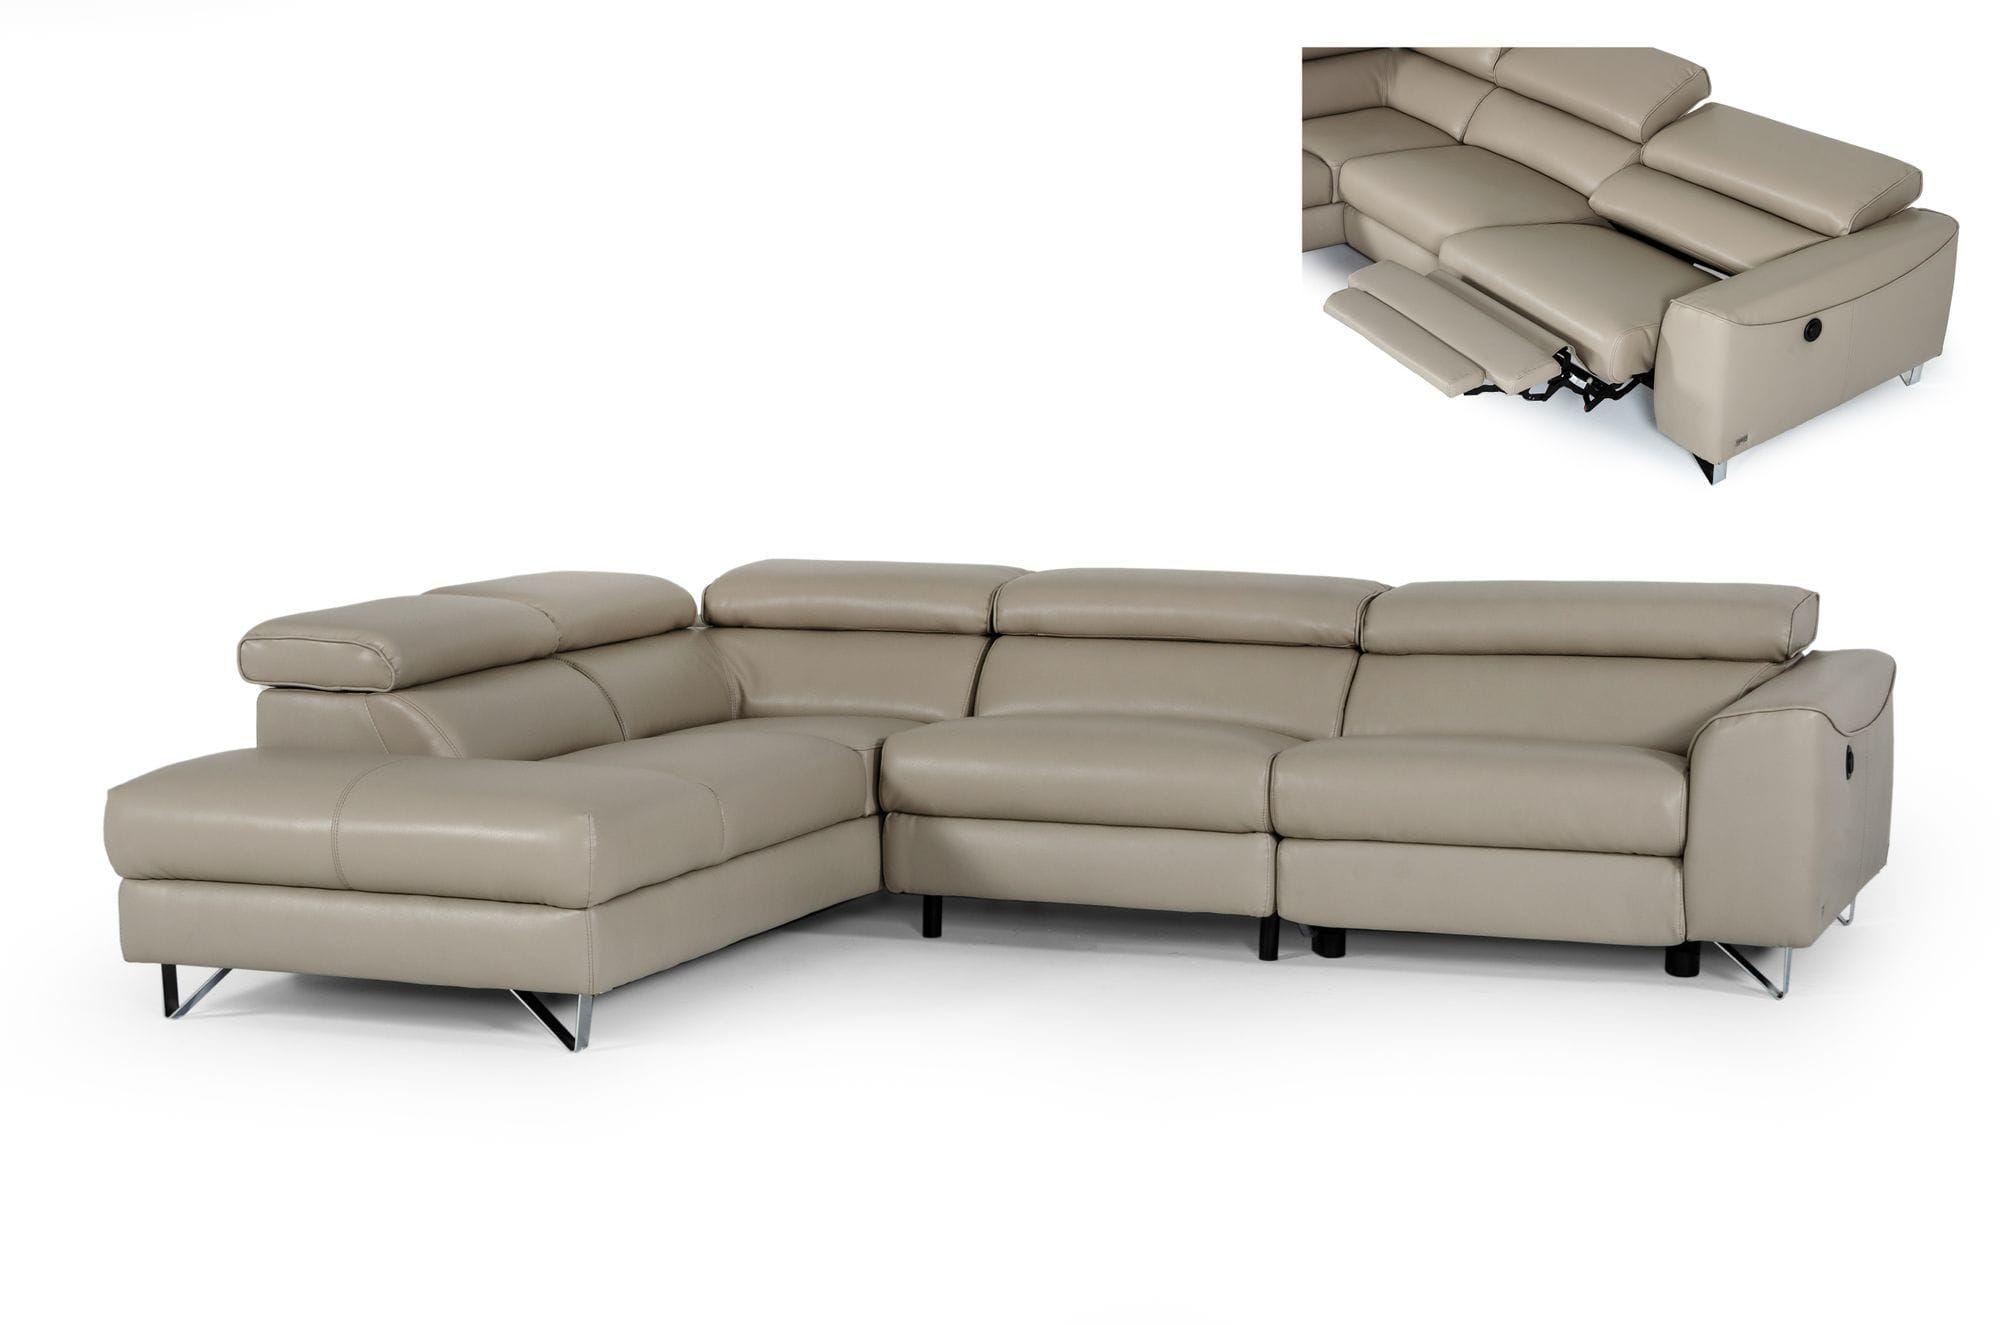 Contemporary, Modern Recliner Sectional VGKNE9112-LAF VGKNE9112-LAF in Taupe Eco-Leather